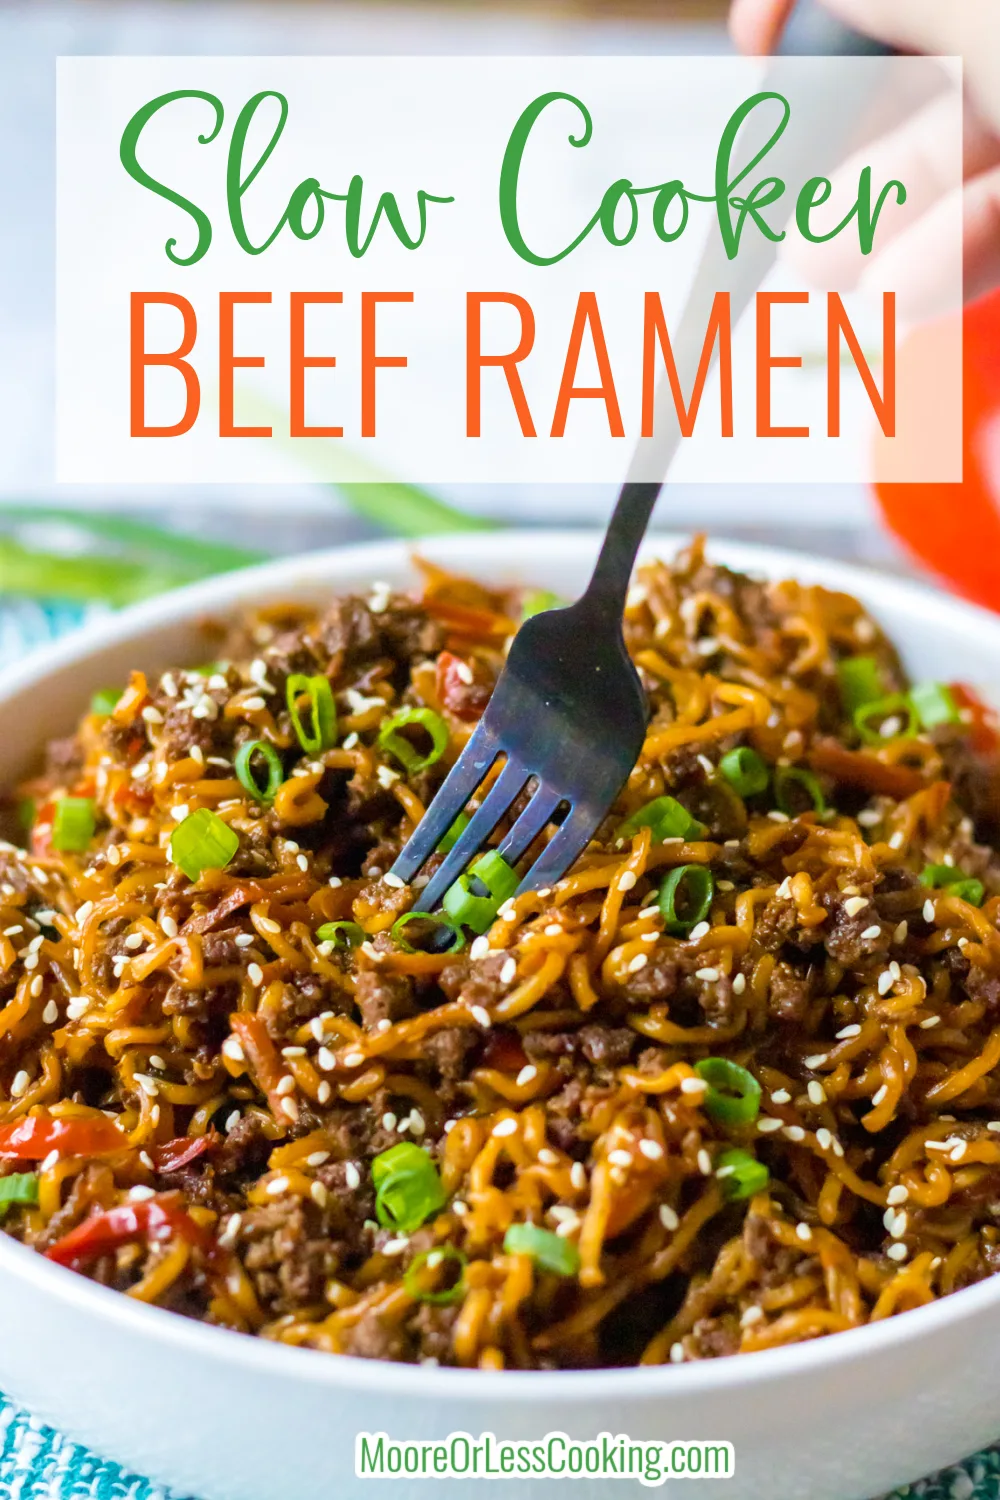 Slow Cooker Beef Ramen is always a favorite weeknight dinner. Simple to throw together but so flavorful. Ground beef, green onions, carrots, red bell pepper, and a sweet and savory sauce make this a crowd-pleaser. via @Mooreorlesscook